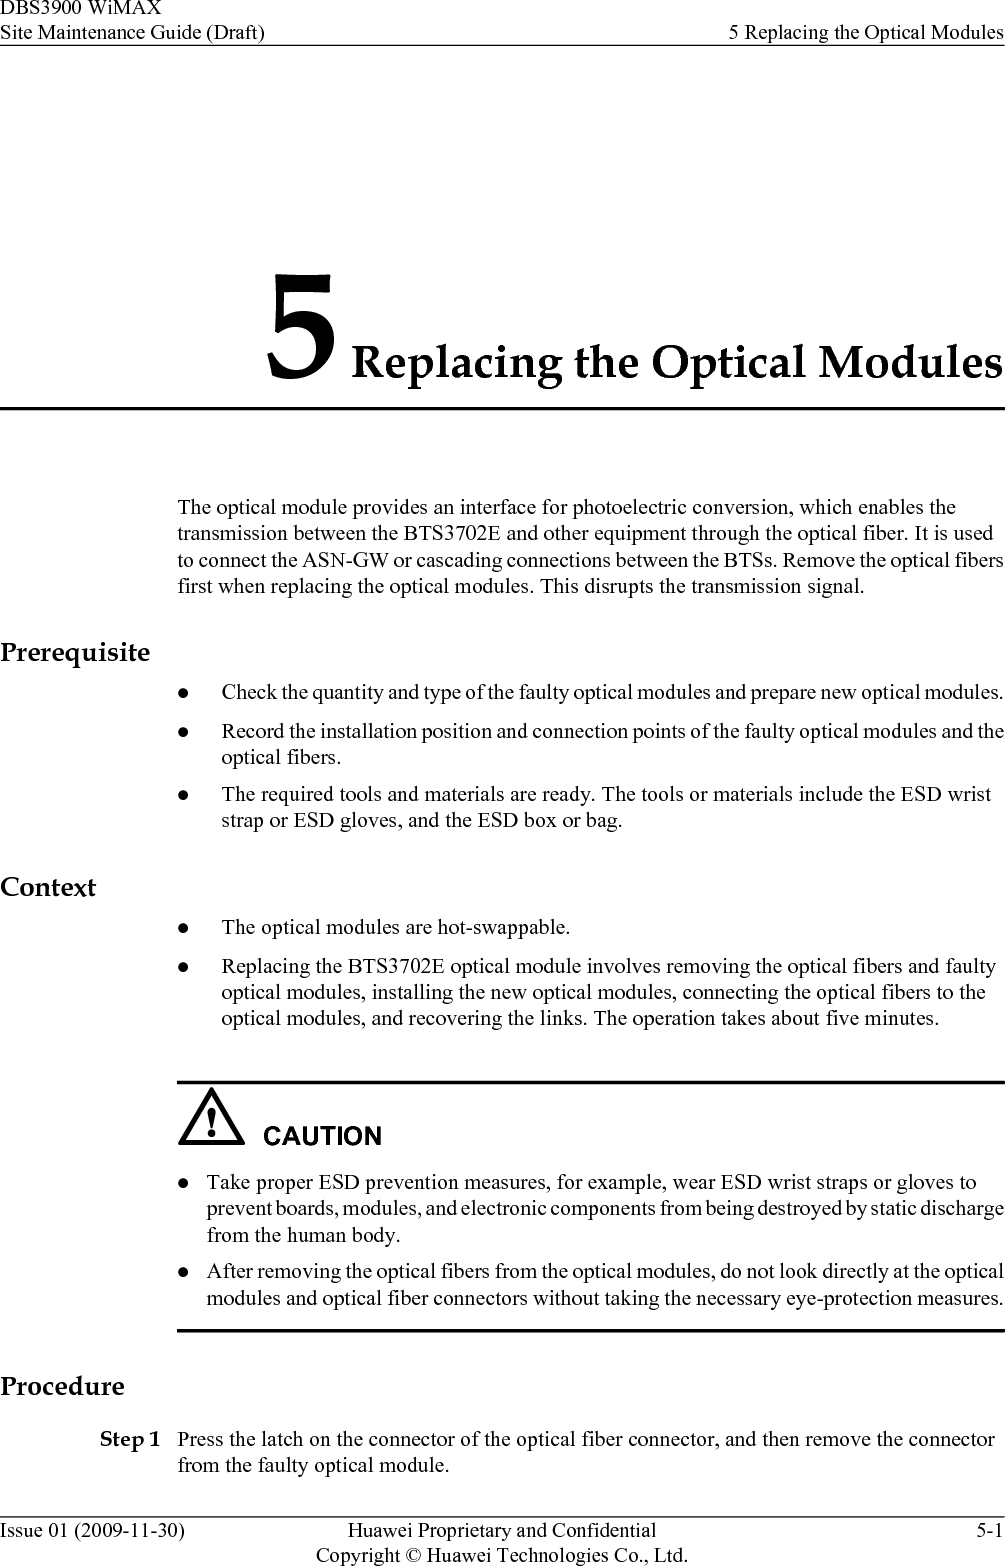 5 Replacing the Optical ModulesThe optical module provides an interface for photoelectric conversion, which enables thetransmission between the BTS3702E and other equipment through the optical fiber. It is usedto connect the ASN-GW or cascading connections between the BTSs. Remove the optical fibersfirst when replacing the optical modules. This disrupts the transmission signal.PrerequisitelCheck the quantity and type of the faulty optical modules and prepare new optical modules.lRecord the installation position and connection points of the faulty optical modules and theoptical fibers.lThe required tools and materials are ready. The tools or materials include the ESD wriststrap or ESD gloves, and the ESD box or bag.ContextlThe optical modules are hot-swappable.lReplacing the BTS3702E optical module involves removing the optical fibers and faultyoptical modules, installing the new optical modules, connecting the optical fibers to theoptical modules, and recovering the links. The operation takes about five minutes.CAUTIONlTake proper ESD prevention measures, for example, wear ESD wrist straps or gloves toprevent boards, modules, and electronic components from being destroyed by static dischargefrom the human body.lAfter removing the optical fibers from the optical modules, do not look directly at the opticalmodules and optical fiber connectors without taking the necessary eye-protection measures.ProcedureStep 1 Press the latch on the connector of the optical fiber connector, and then remove the connectorfrom the faulty optical module.DBS3900 WiMAXSite Maintenance Guide (Draft) 5 Replacing the Optical ModulesIssue 01 (2009-11-30) Huawei Proprietary and ConfidentialCopyright © Huawei Technologies Co., Ltd.5-1